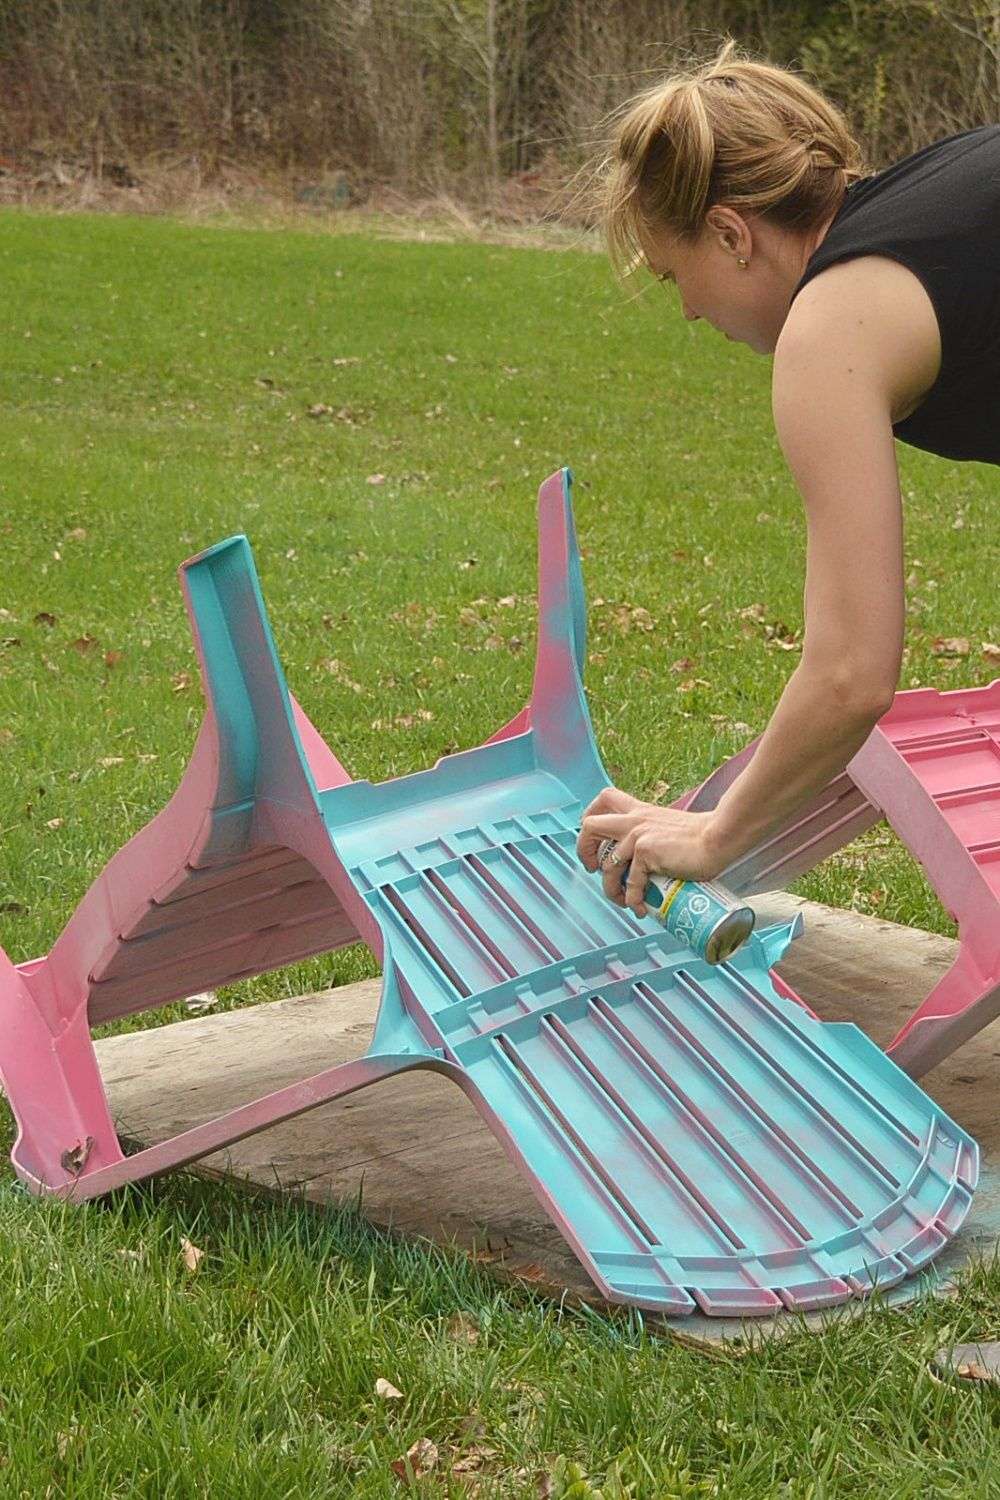 How to spray paint plastic chairs